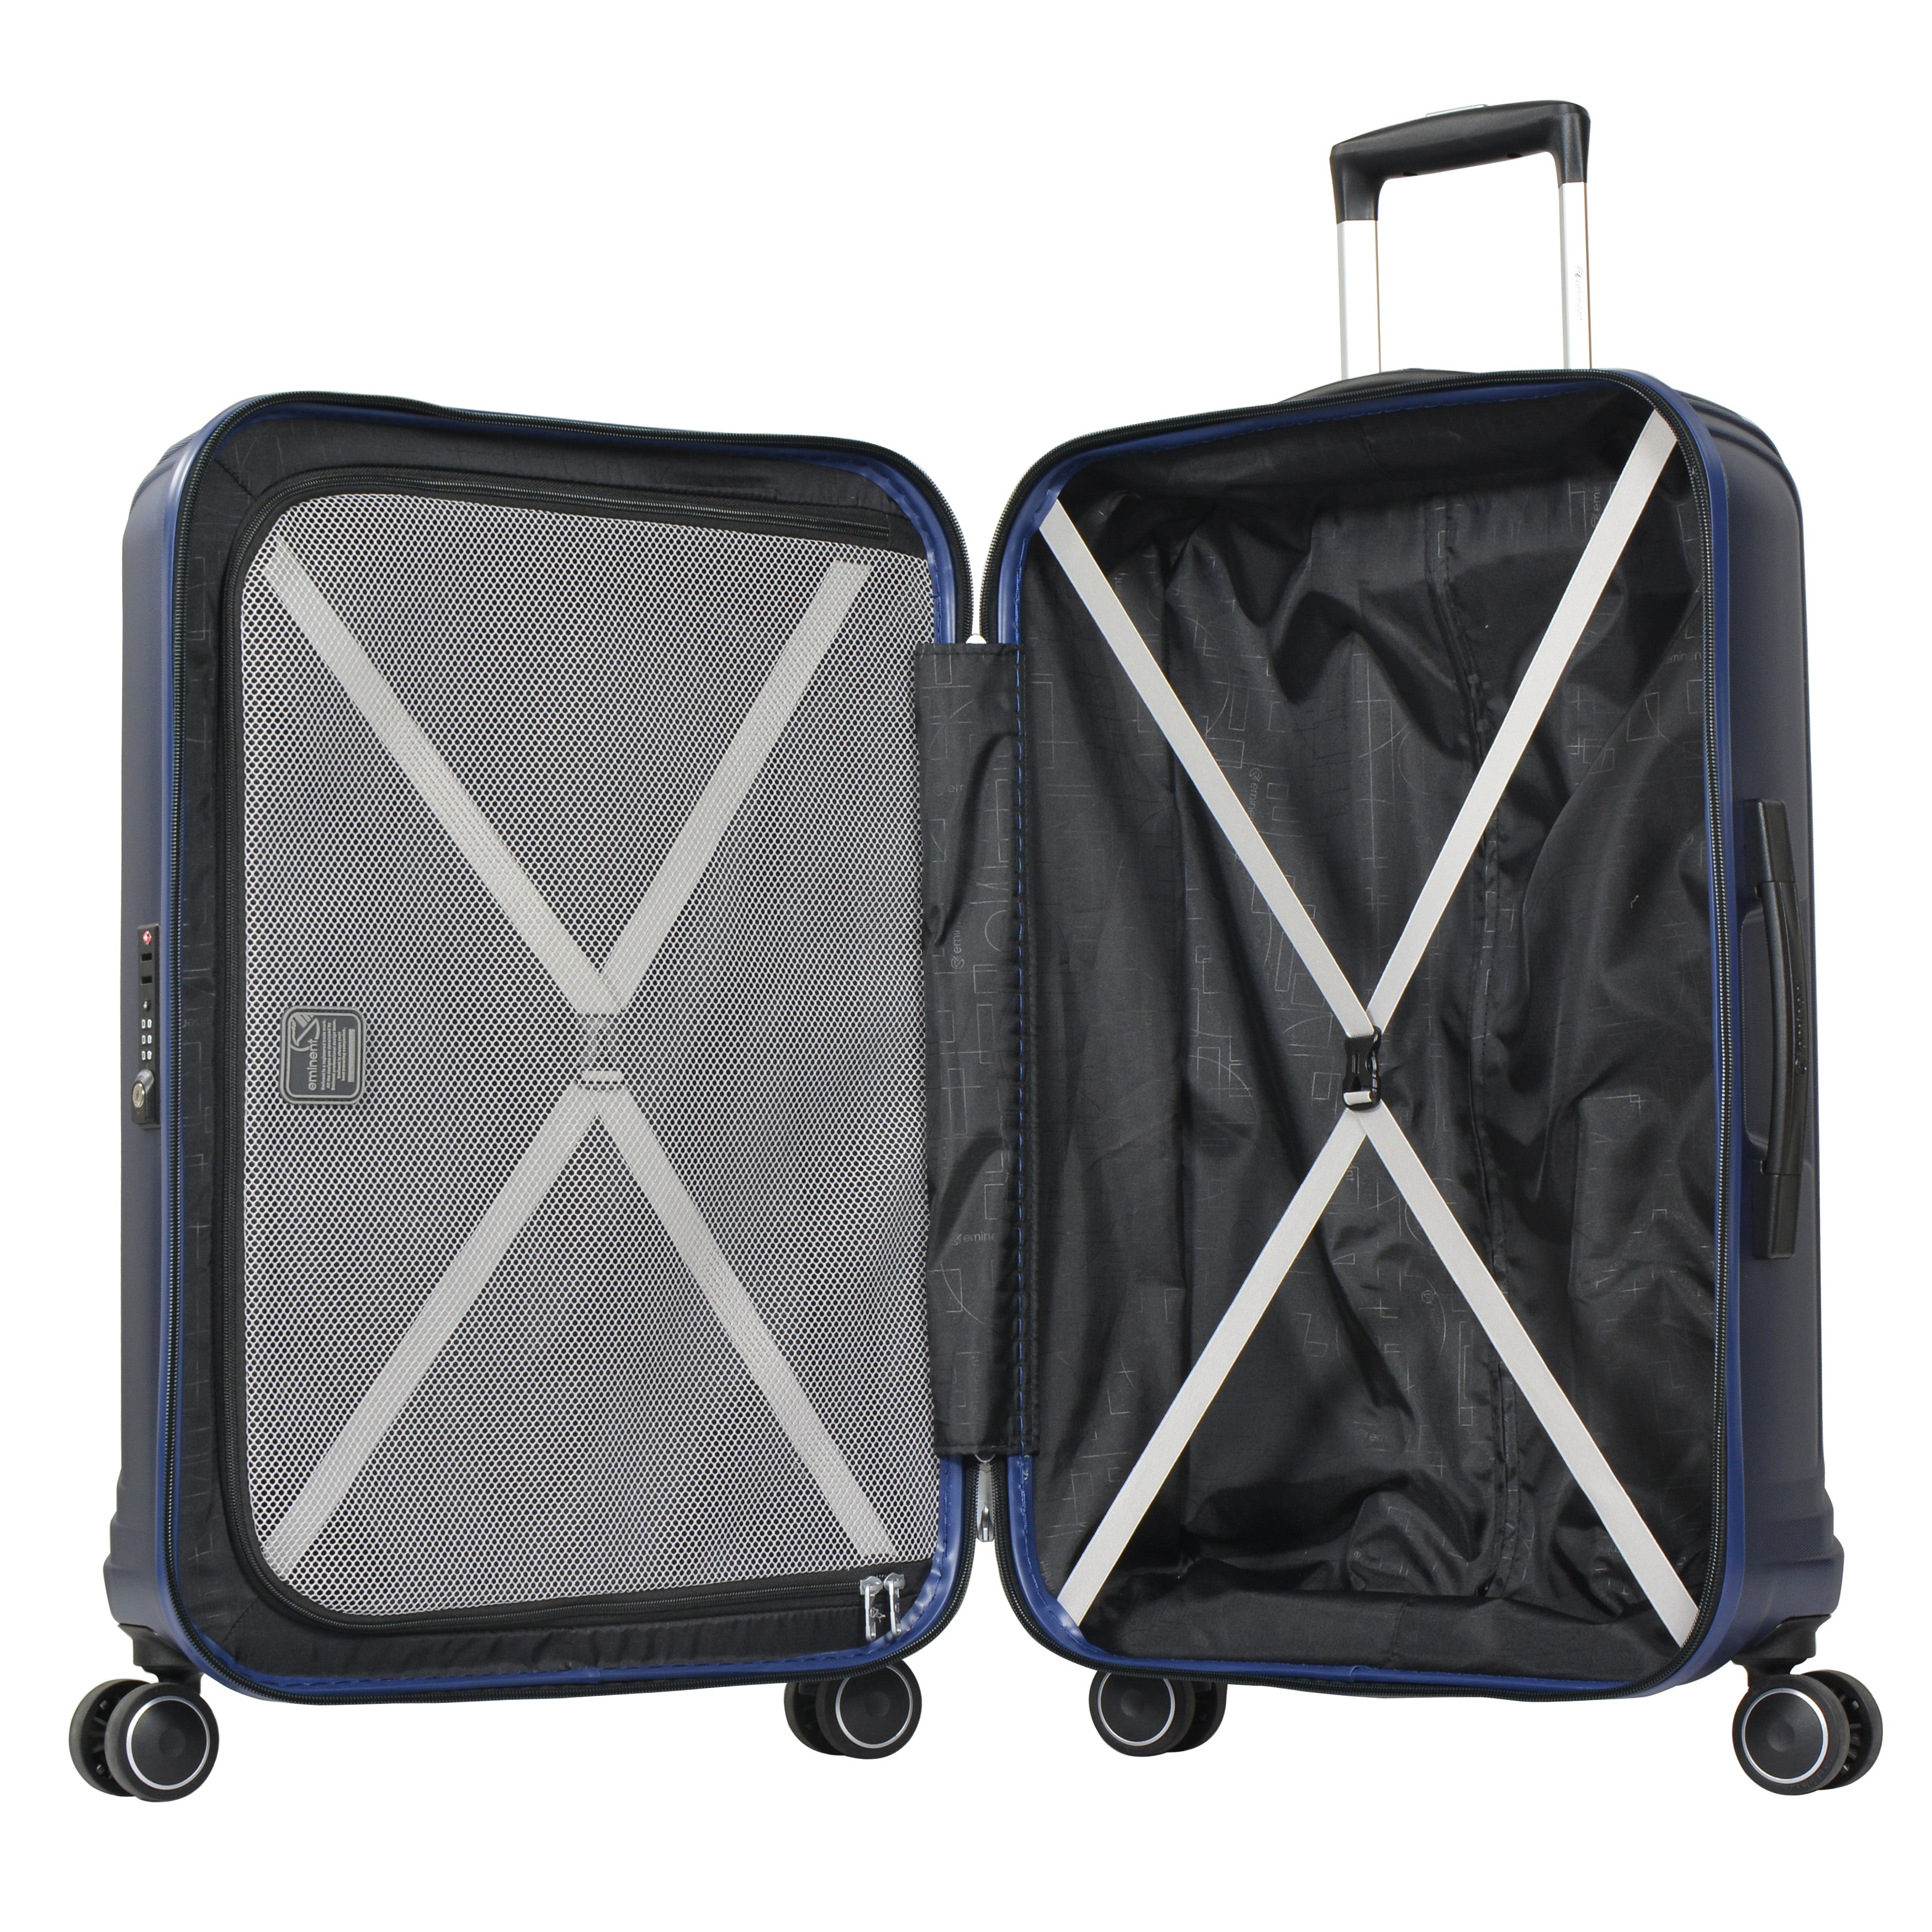 28" checked luggage PC Zipper Spinner trolley bag by Eminent (KJ09-28) - buyluggageonline